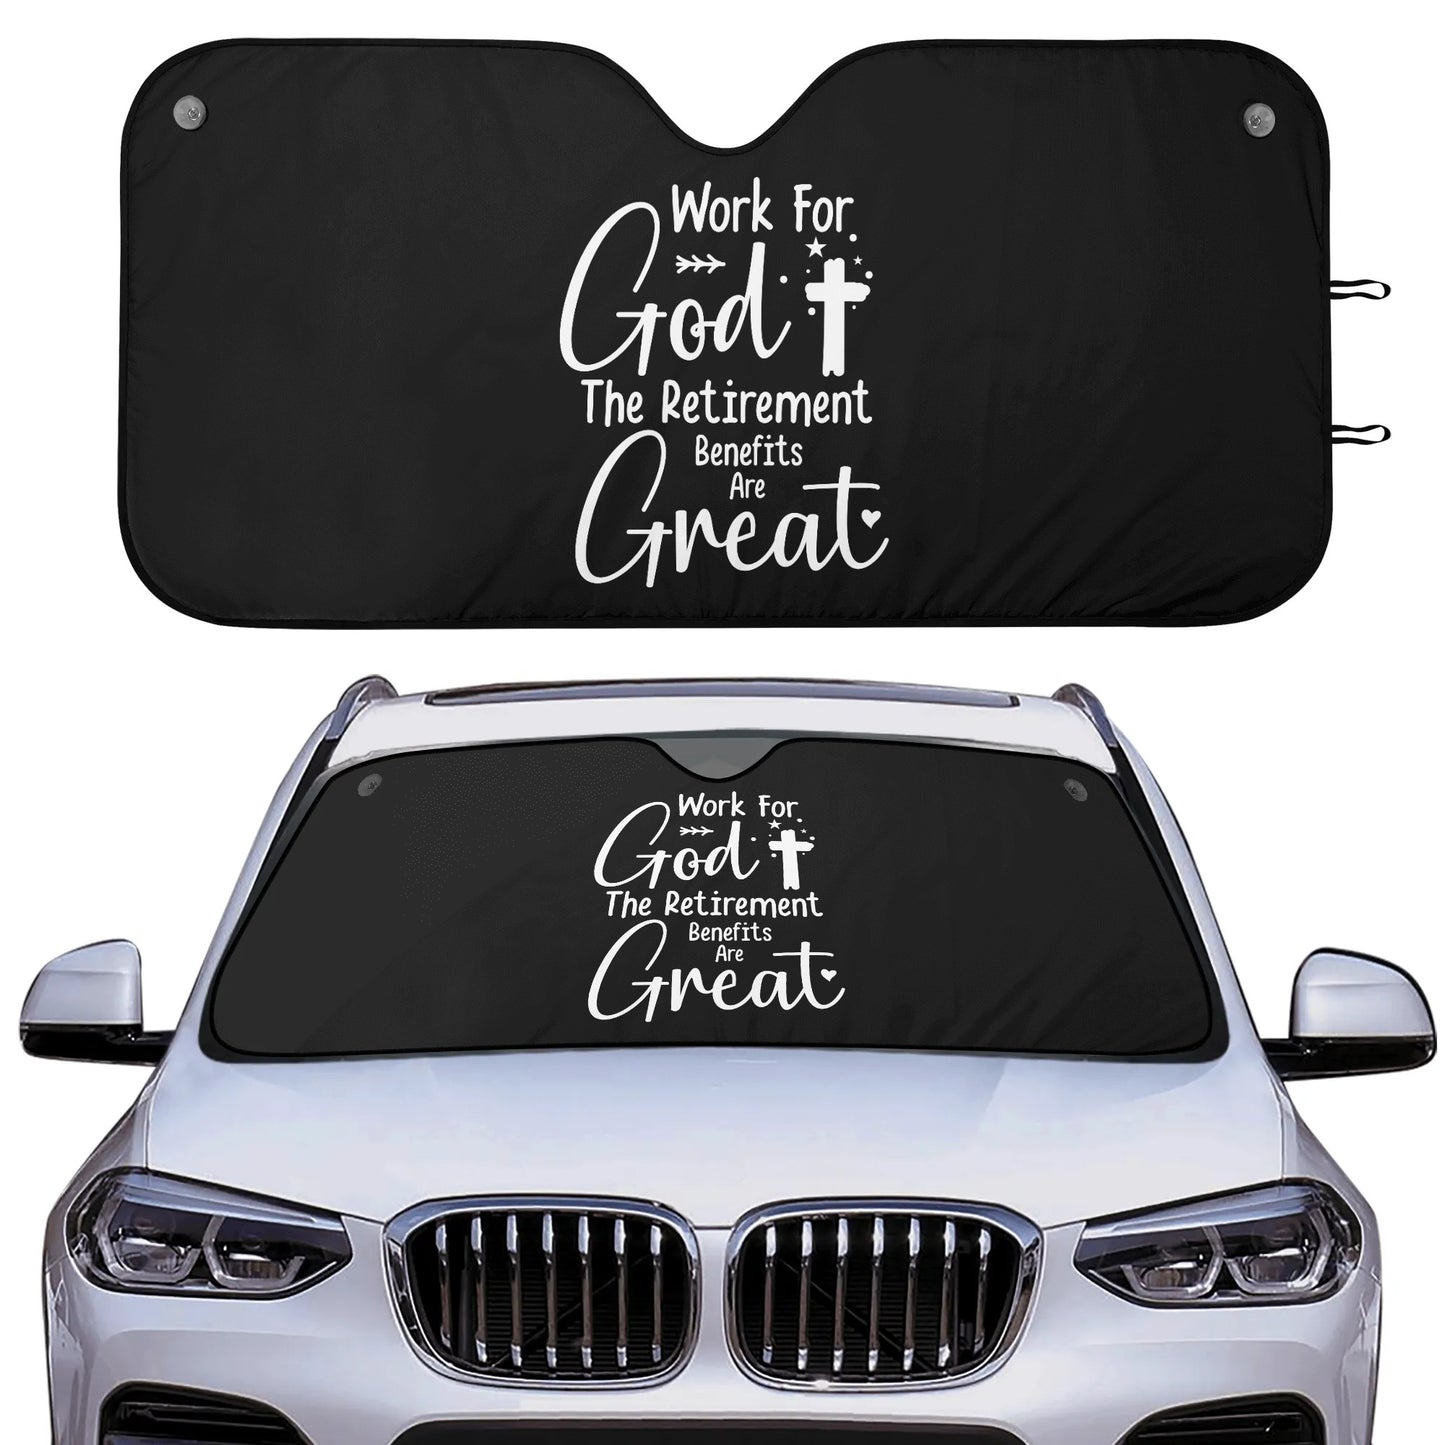 Work For God The Retirement Benefits Are Great Car Sunshade Christian Car Accessories popcustoms